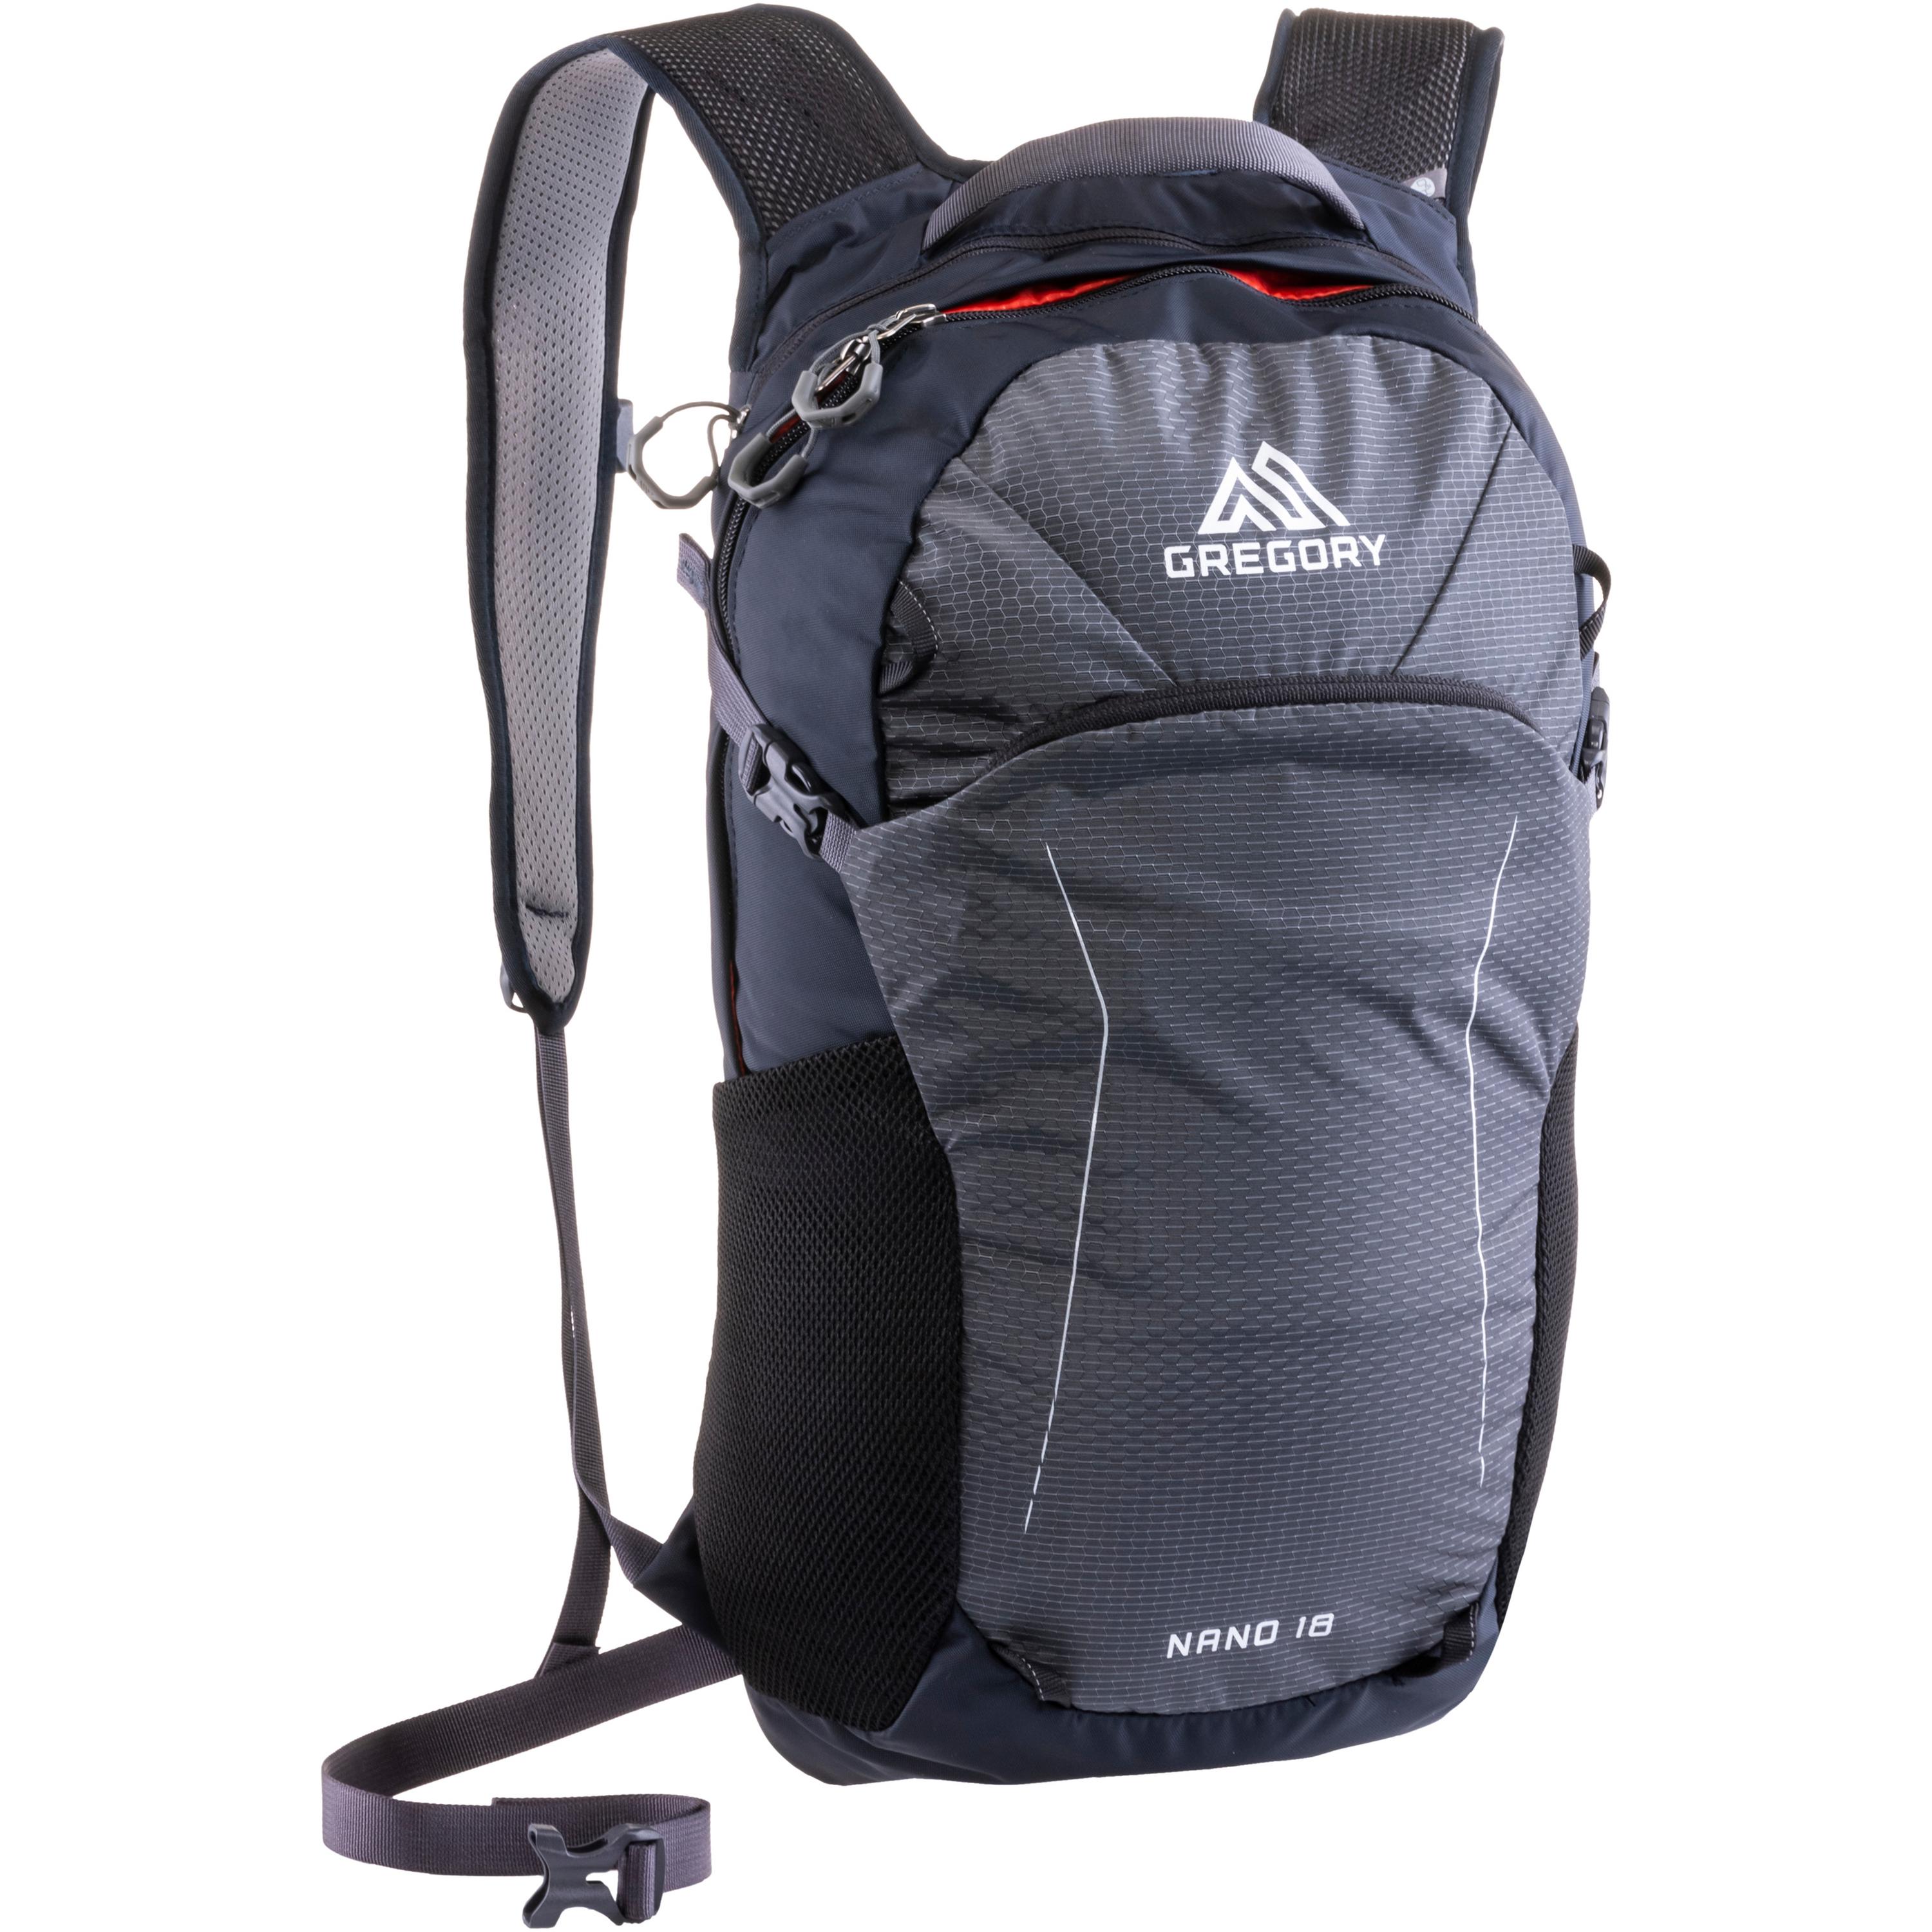 Image of Gregory NANO 18 Daypack